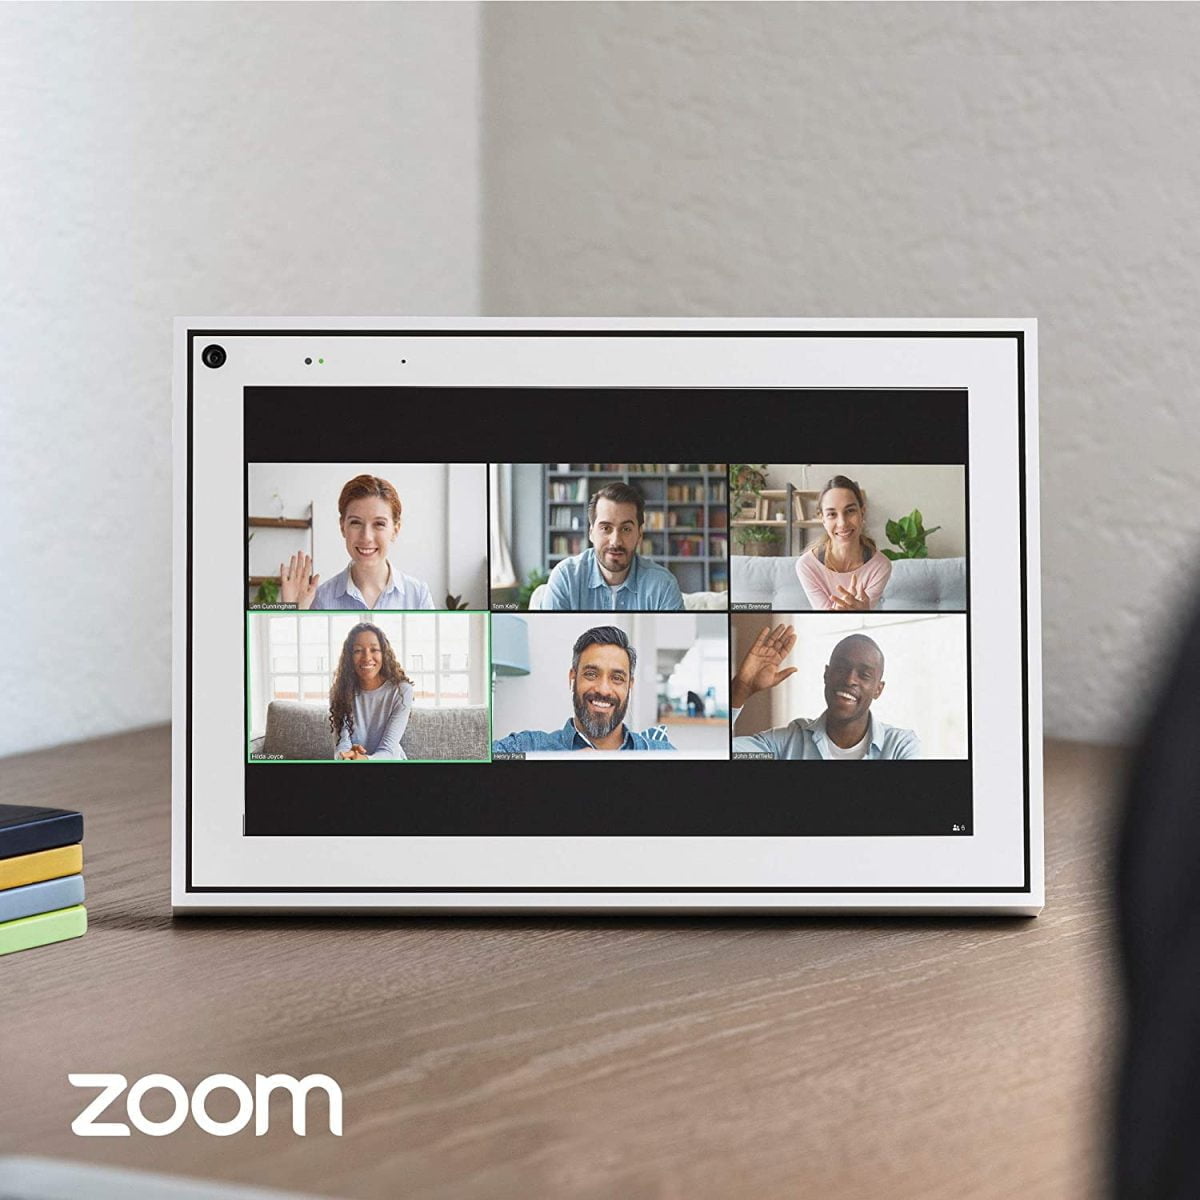 81Pkjwzoebl. Ac Sl1500 Facebook Portal - Smart Video Calling 10” Touch Screen Display With Alexa – White &Lt;Ul Class=&Quot;A-Unordered-List A-Vertical A-Spacing-Mini&Quot;&Gt; &Lt;Li&Gt;&Lt;Span Class=&Quot;A-List-Item&Quot;&Gt;Easily Video Call With Friends And Family Using Your Messenger, Whatsapp Or Zoom Account, Even If They Don'T Have Portal.&Lt;/Span&Gt;&Lt;/Li&Gt; &Lt;Li&Gt;&Lt;Span Class=&Quot;A-List-Item&Quot;&Gt;Smart Camera Automatically Pans And Zooms To Keep Everyone In Frame, So You Can Catch Up Hands-Free.&Lt;/Span&Gt;&Lt;/Li&Gt; &Lt;Li&Gt;&Lt;Span Class=&Quot;A-List-Item&Quot;&Gt;Hear And Be Heard. Smart Sound Enhances Your Voice While Minimizing Unwanted Background Noise.&Lt;/Span&Gt;&Lt;/Li&Gt; &Lt;Li&Gt;&Lt;Span Class=&Quot;A-List-Item&Quot;&Gt;Experience Even More Together. Join Or Host A Group Call Of Up To 50 People With Messenger Rooms.&Lt;/Span&Gt;&Lt;/Li&Gt; &Lt;Li&Gt;&Lt;Span Class=&Quot;A-List-Item&Quot;&Gt;Become Some Of Your Children'S Favorite Storybook Characters As You Read Along To Well-Loved Tales With Music, Animation And Immersive Ar Effects.&Lt;/Span&Gt;&Lt;/Li&Gt; &Lt;Li&Gt;&Lt;Span Class=&Quot;A-List-Item&Quot;&Gt;Listen To Your Favorite Music And Streaming Apps Like Spotify Or Pandora, Display Your Photos From Instagram And Facebook, Broadcast With Facebook Live, And More.&Lt;/Span&Gt;&Lt;/Li&Gt; &Lt;Li&Gt;&Lt;Span Class=&Quot;A-List-Item&Quot;&Gt;Work Smarter From Home With Partners Like Zoom And Workplace From Facebook. Connect With Co-Workers Even If They’re Remote.&Lt;/Span&Gt;&Lt;/Li&Gt; &Lt;/Ul&Gt; &Lt;Div Class=&Quot;A-Row A-Expander-Container A-Expander-Inline-Container&Quot; Aria-Live=&Quot;Polite&Quot;&Gt; &Lt;Div Class=&Quot;A-Expander-Content A-Expander-Extend-Content A-Expander-Content-Expanded&Quot; Aria-Expanded=&Quot;True&Quot;&Gt; &Lt;Ul Class=&Quot;A-Unordered-List A-Vertical A-Spacing-None&Quot;&Gt; &Lt;Li&Gt;&Lt;Span Class=&Quot;A-List-Item&Quot;&Gt;See And Do More With Alexa Built-In. Control Your Smart Home, Listen To Your Favorite Music, Watch The News, Get The Weather, Set A Timer And More.&Lt;/Span&Gt;&Lt;/Li&Gt; &Lt;Li&Gt;&Lt;Span Class=&Quot;A-List-Item&Quot;&Gt;Easily Disable The Camera And Microphone, Or Block The Camera Lens With A Single Switch. All Portal Video Calls Are Encrypted.&Lt;/Span&Gt;&Lt;/Li&Gt; &Lt;/Ul&Gt; &Lt;/Div&Gt; &Lt;/Div&Gt; Facebook Portal - Smart Video Calling 10” Touch Screen Display With Alexa – White